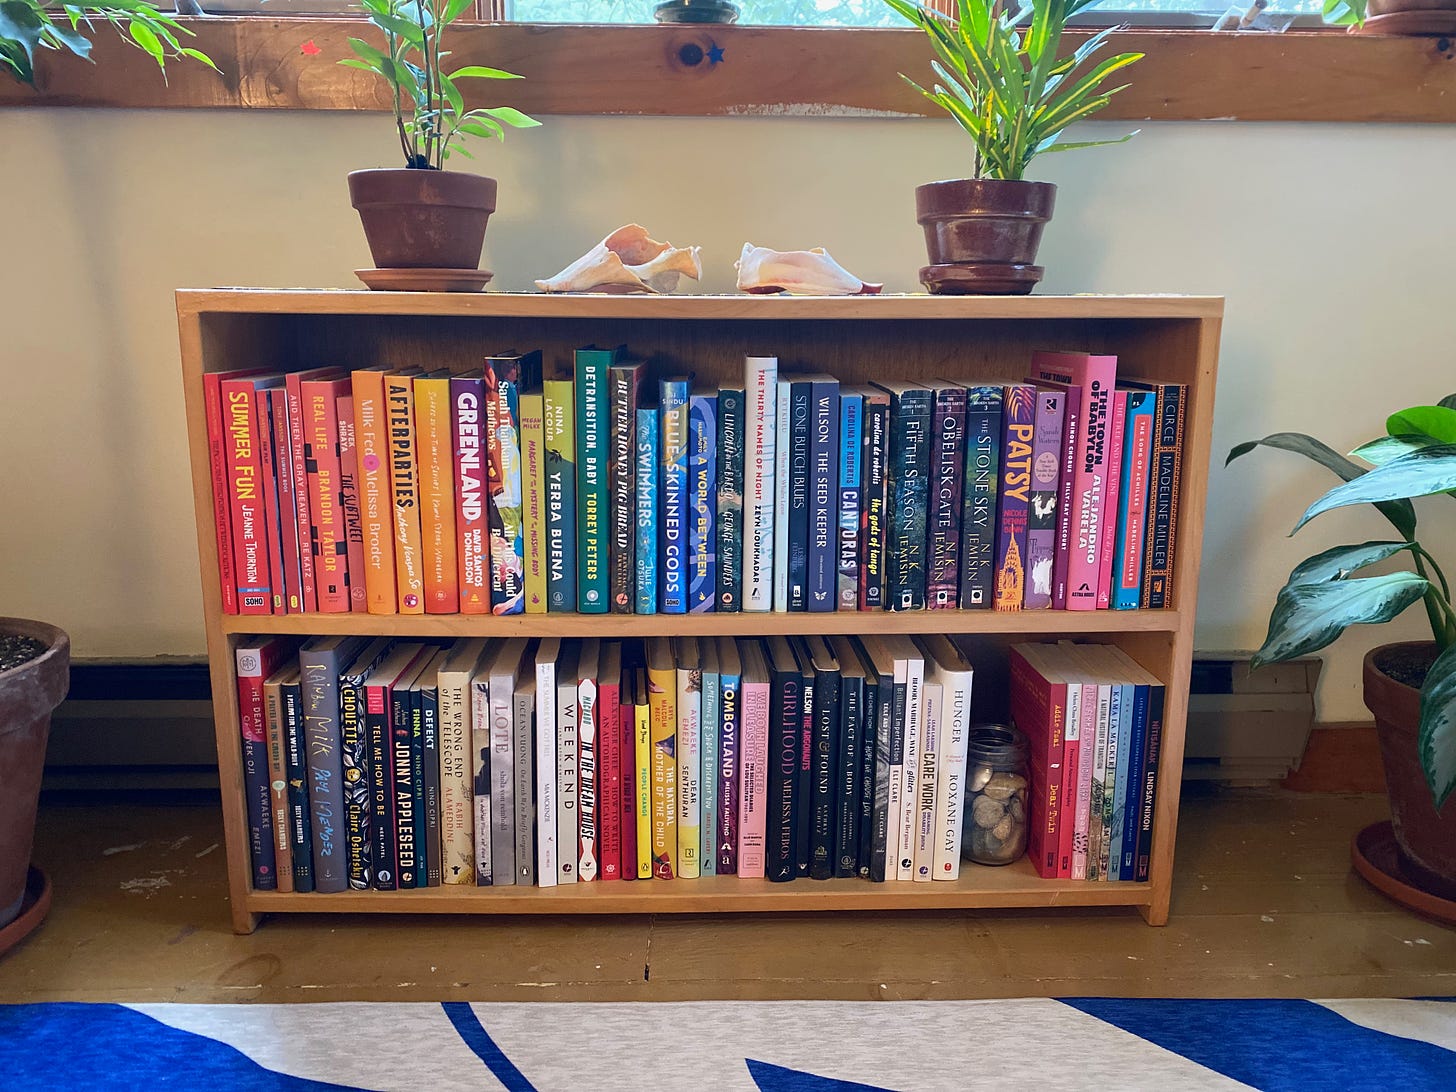 A low wooden shelf under a window, full of books arranged in rainbow colors. Two small potted plants and two broken conch shells sit on top of the shelf.